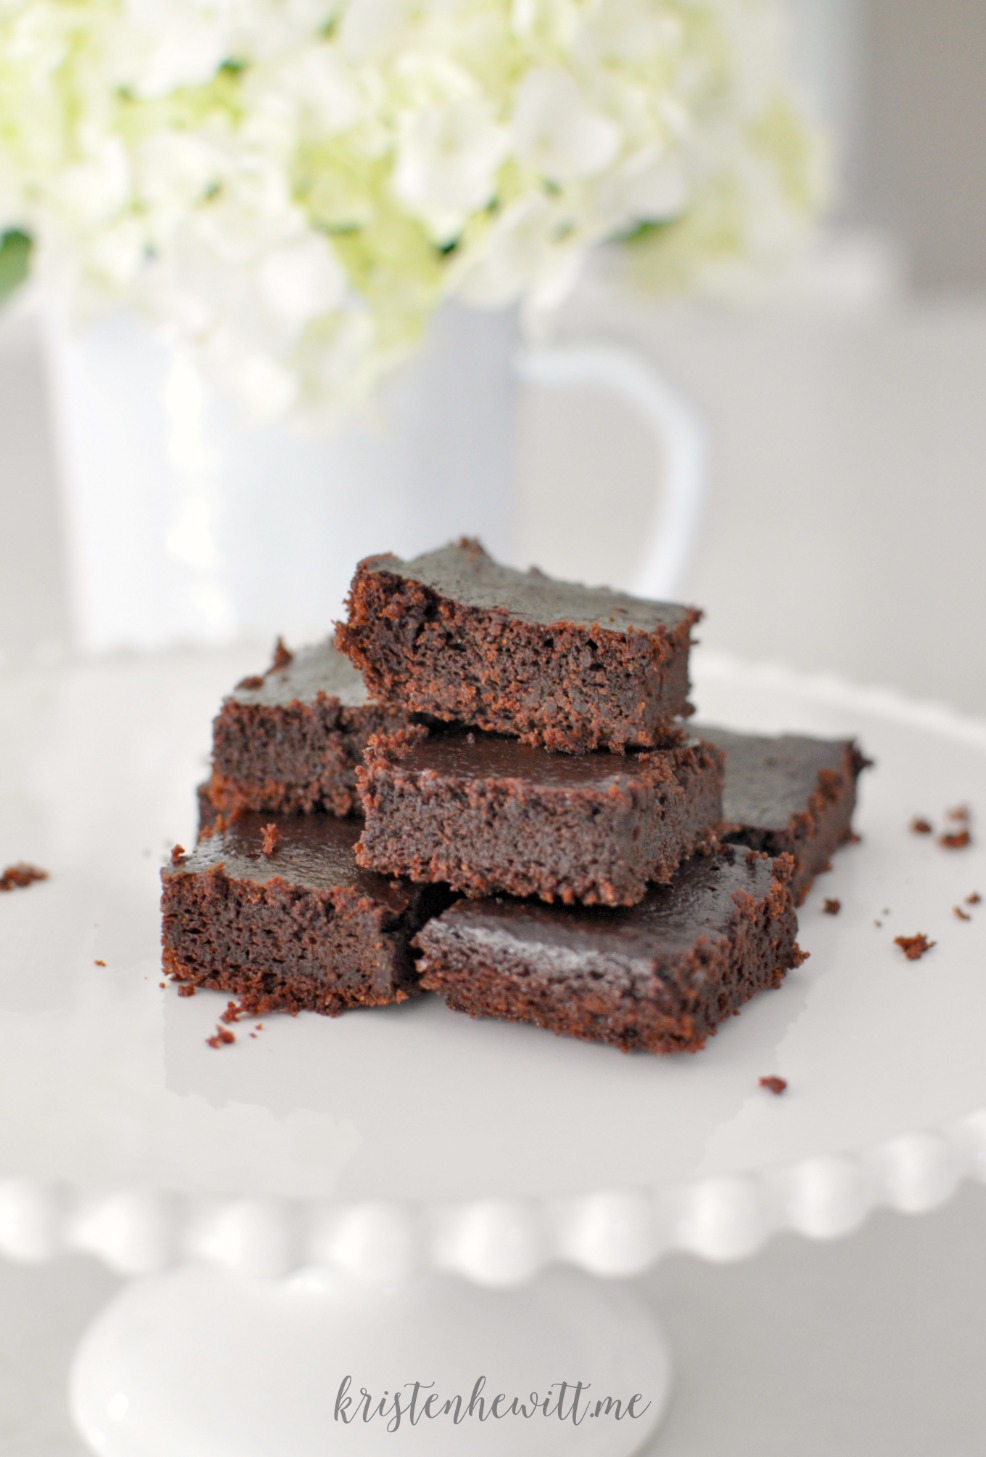 Finding sweet treats is hard when you're on the paleo diet. But don't despair, these easy paleo fudge brownies are easy, satisfying, and delicious!